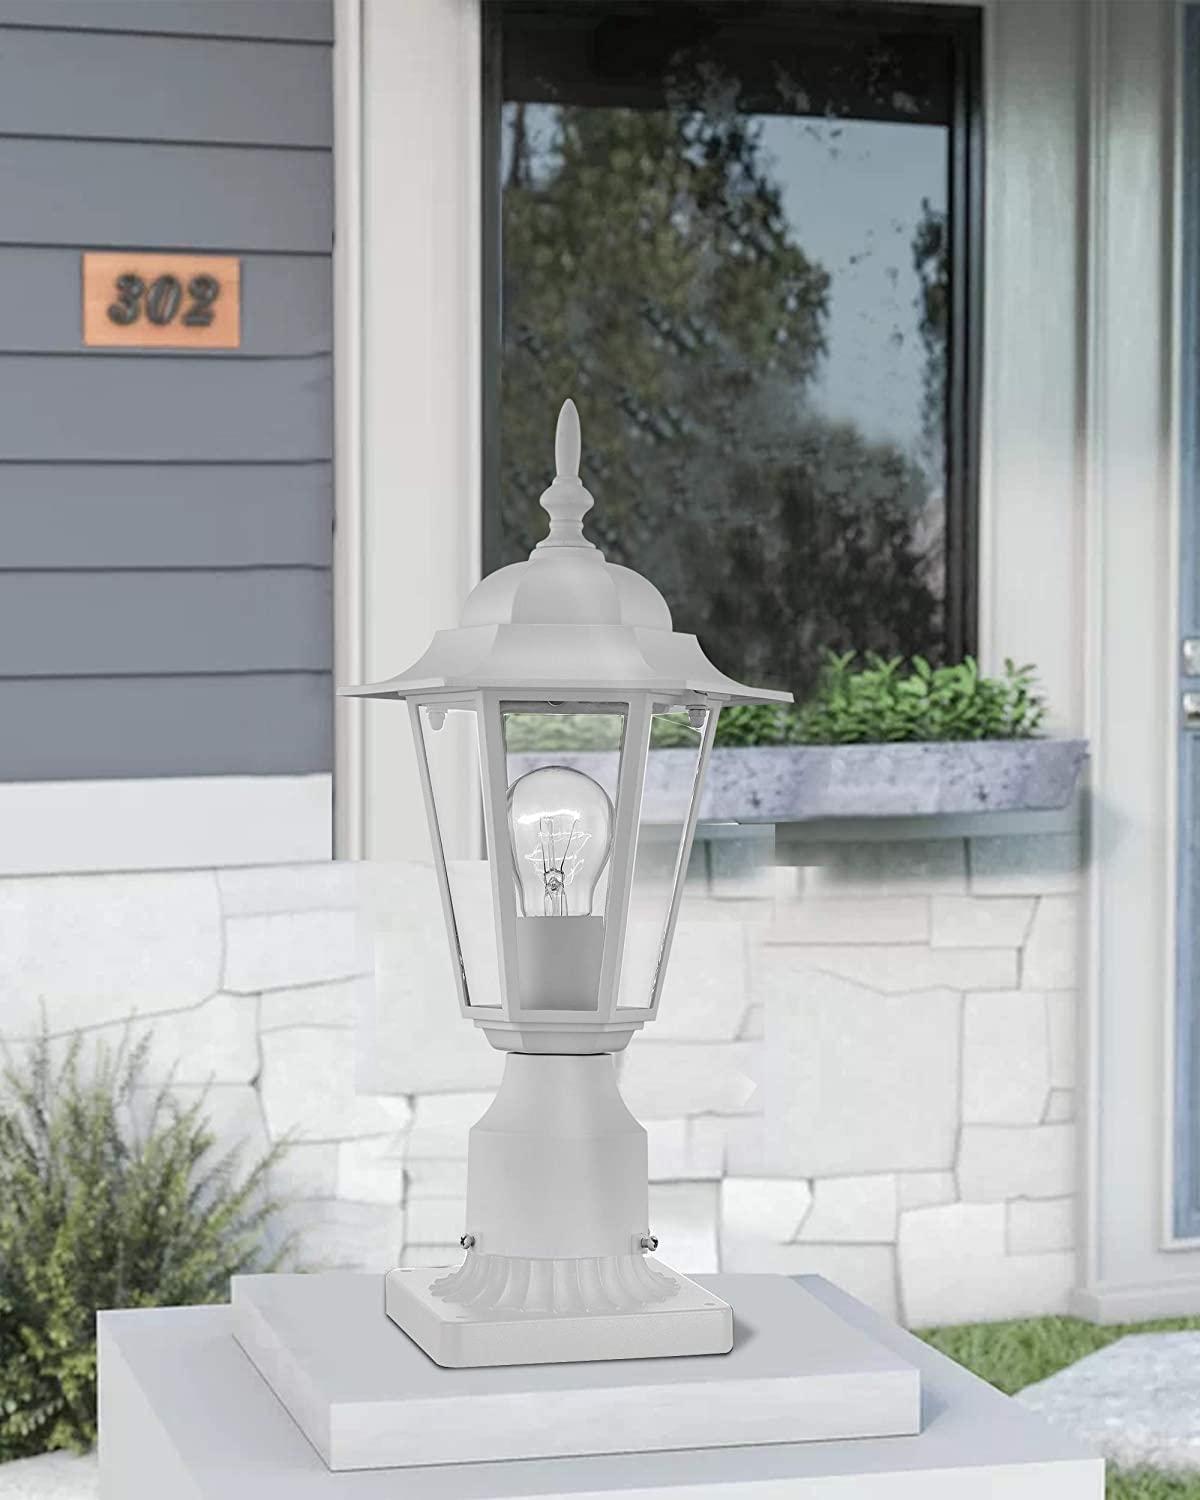 Gruenlich Outdoor Post Lighting Fixture with One E26 Medium Base Max 100W, Aluminum Housing Plus Glass, Bulb Not Included (White Finish)